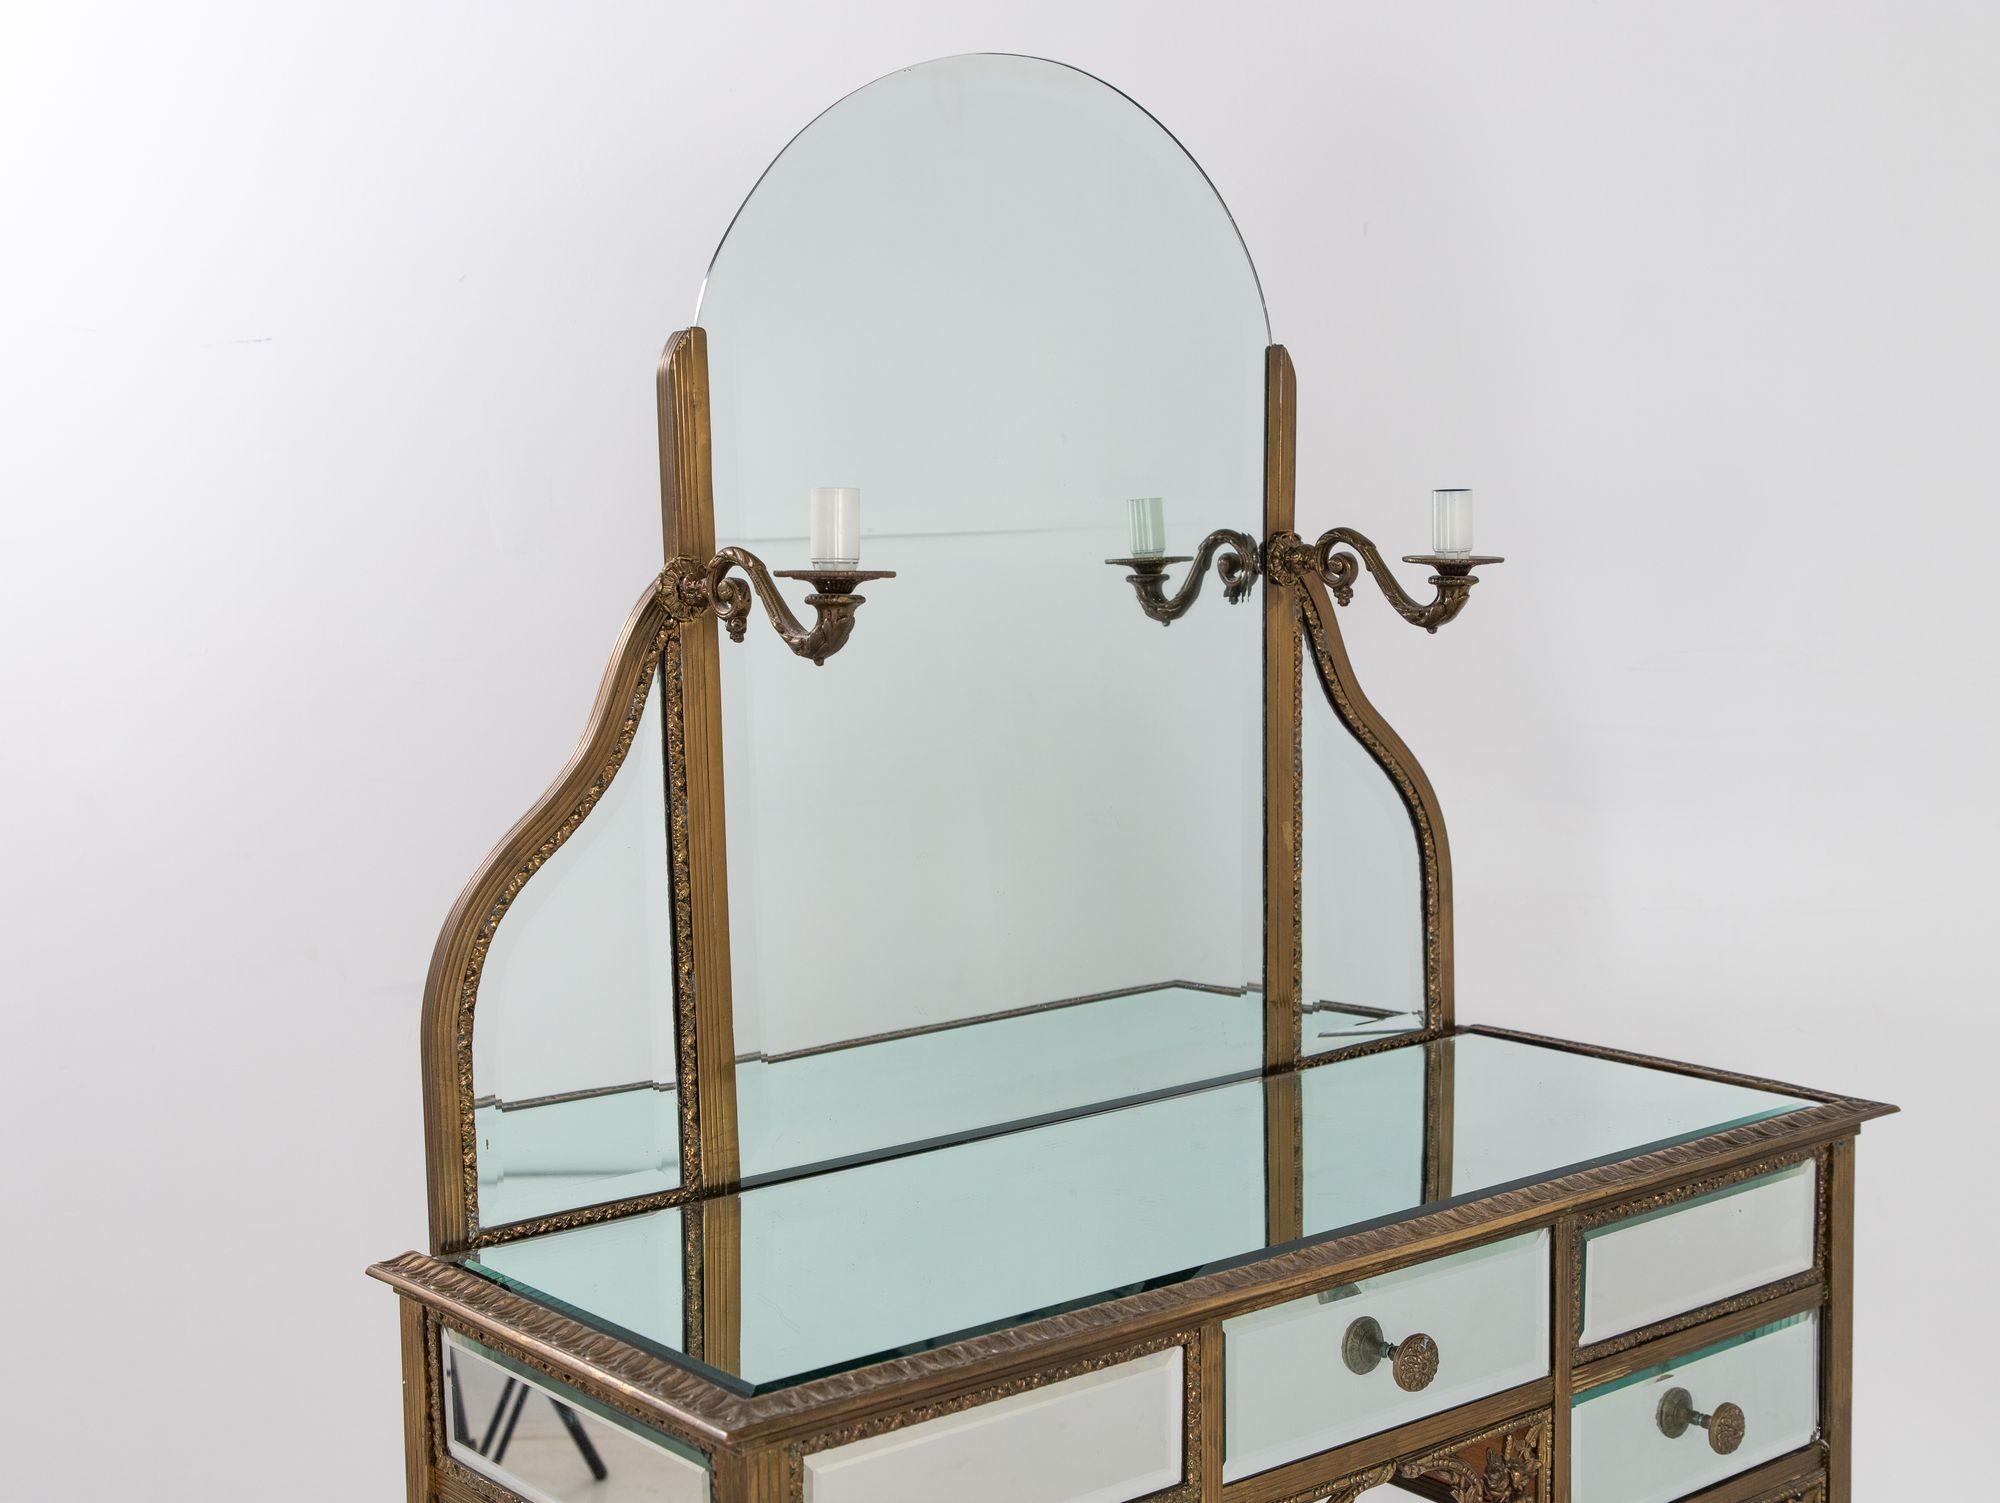 Vintage French 1940s mirrored glass dressing table or vanity with two electrified sconces. Needs to be rewired. Three working drawers. Good condition except a couple of decorative rosettes are missing. Desk height is 32